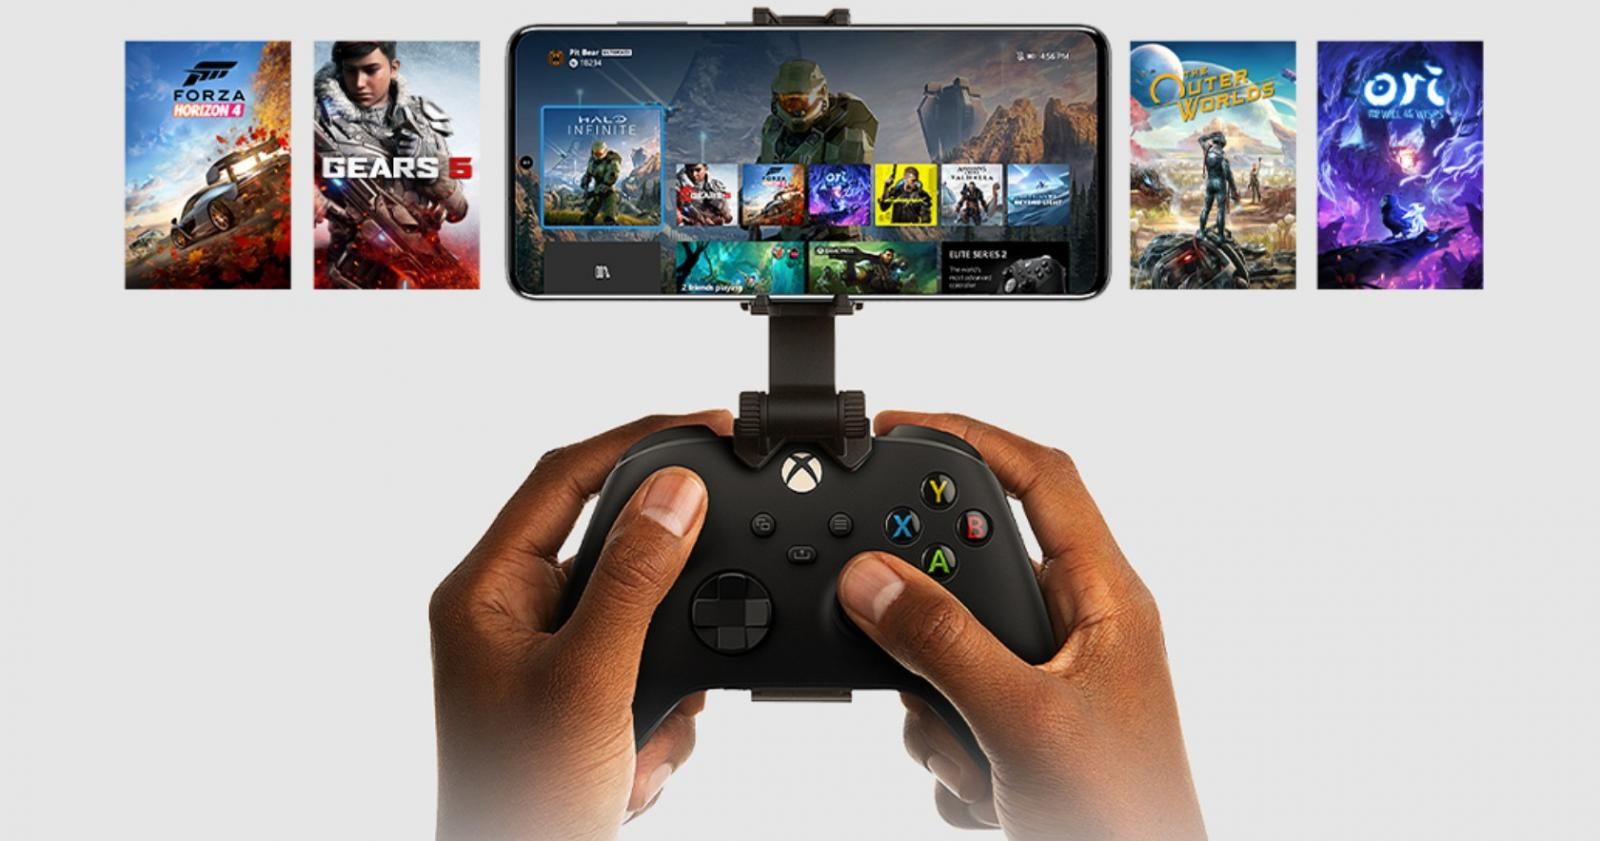 Xbox Cloud Gaming – how to stream games on iPhone or iPad - TapSmart